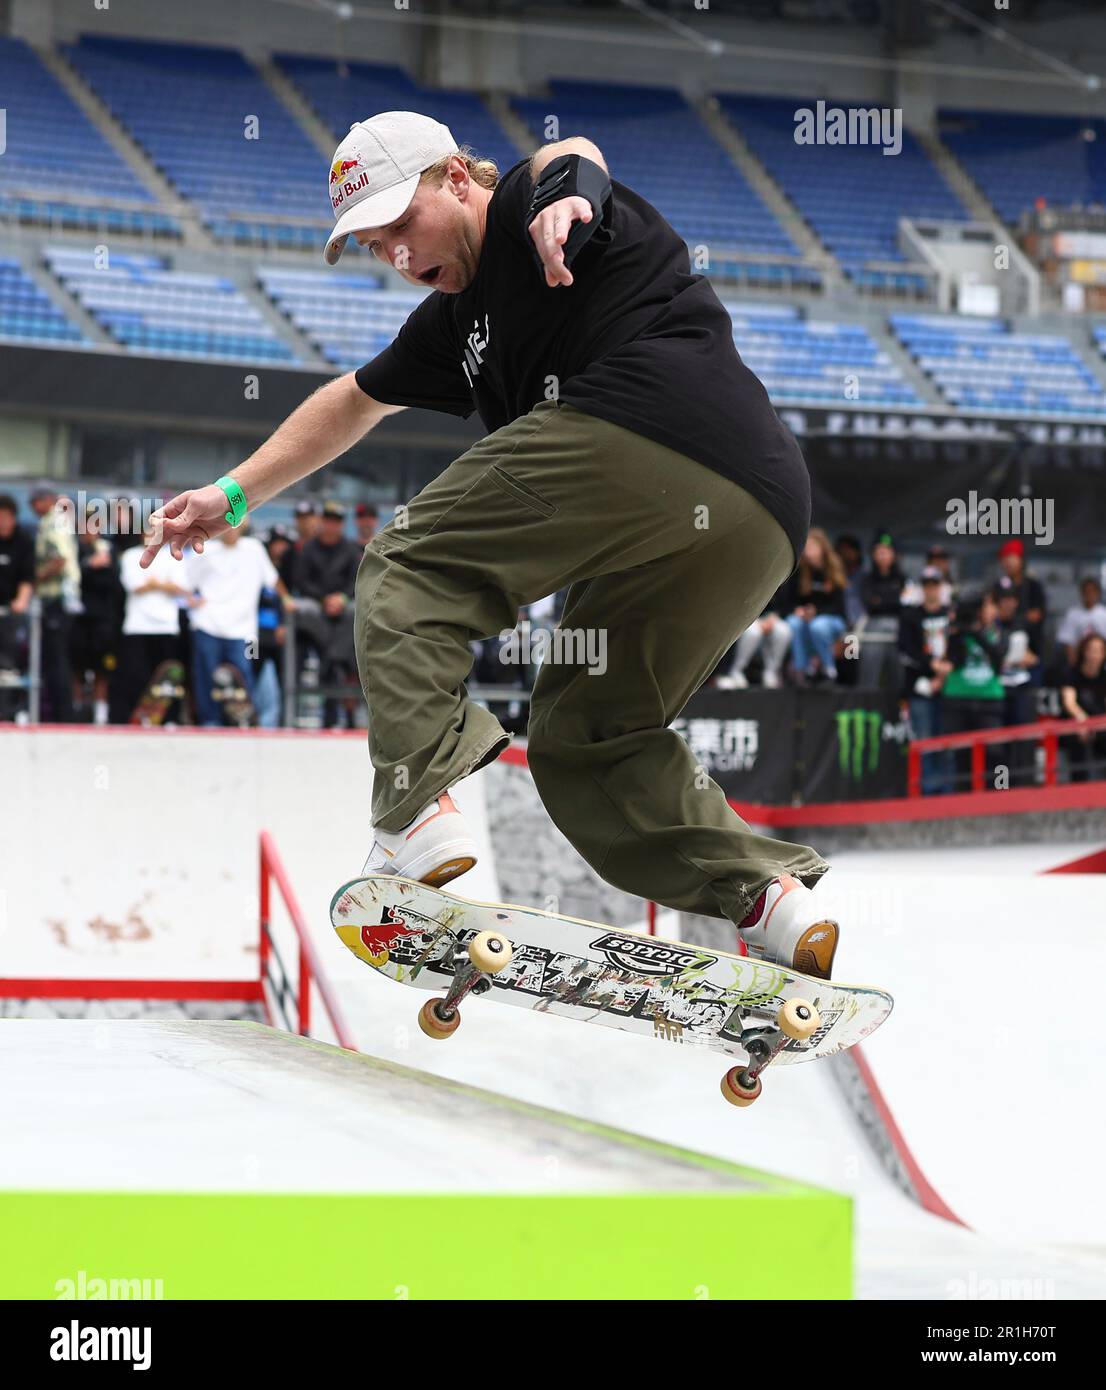 Jamie Foy of the U.S.A.performs during the men's Skateboarding Street final  of X Games Chiba 2023 at ZOZO Marine Stadium in Chiba City, Chiba  Prefecture on May 14, 2023.Foy finished 3rd place